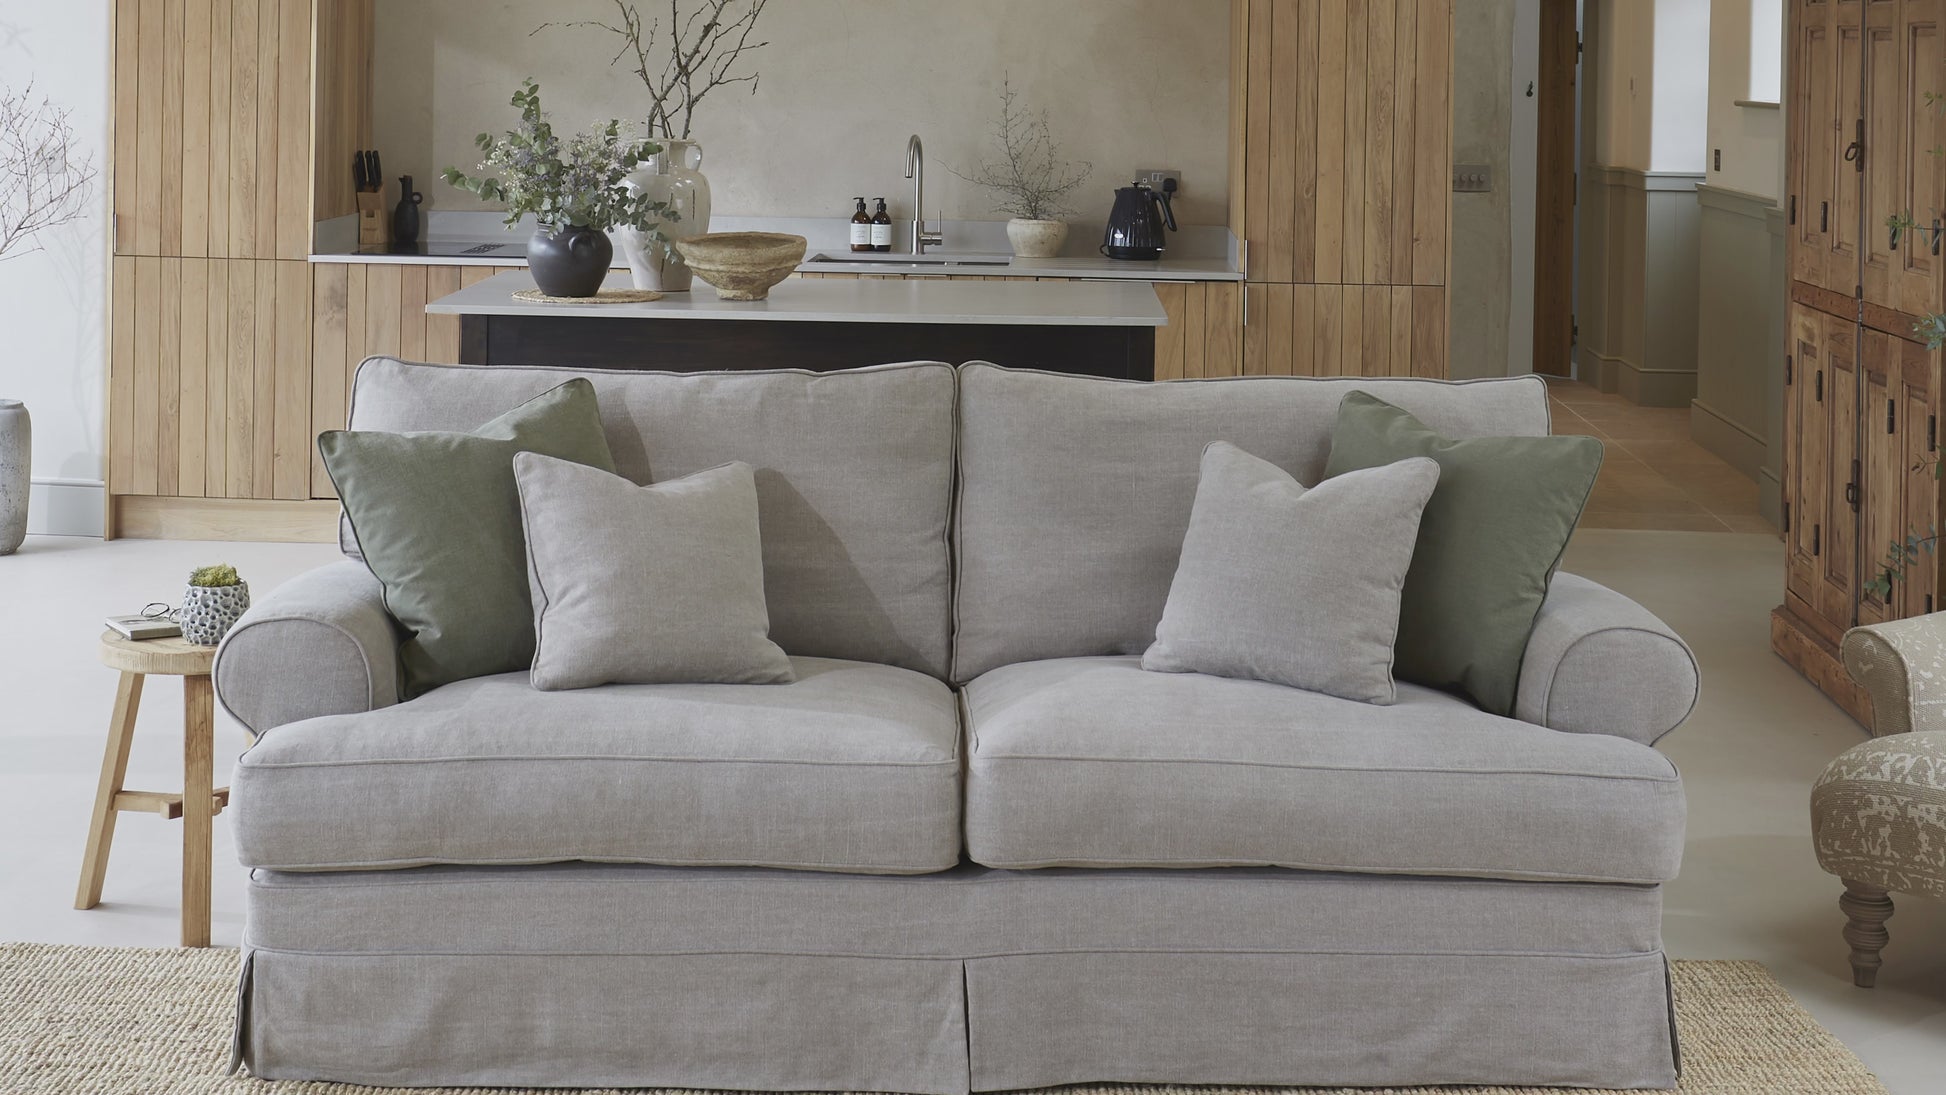 Stylish and practical, meet the Havana Sofa. Relaxed, comfortable and easy to refresh or restyle thanks to its easy to remove loose covers.